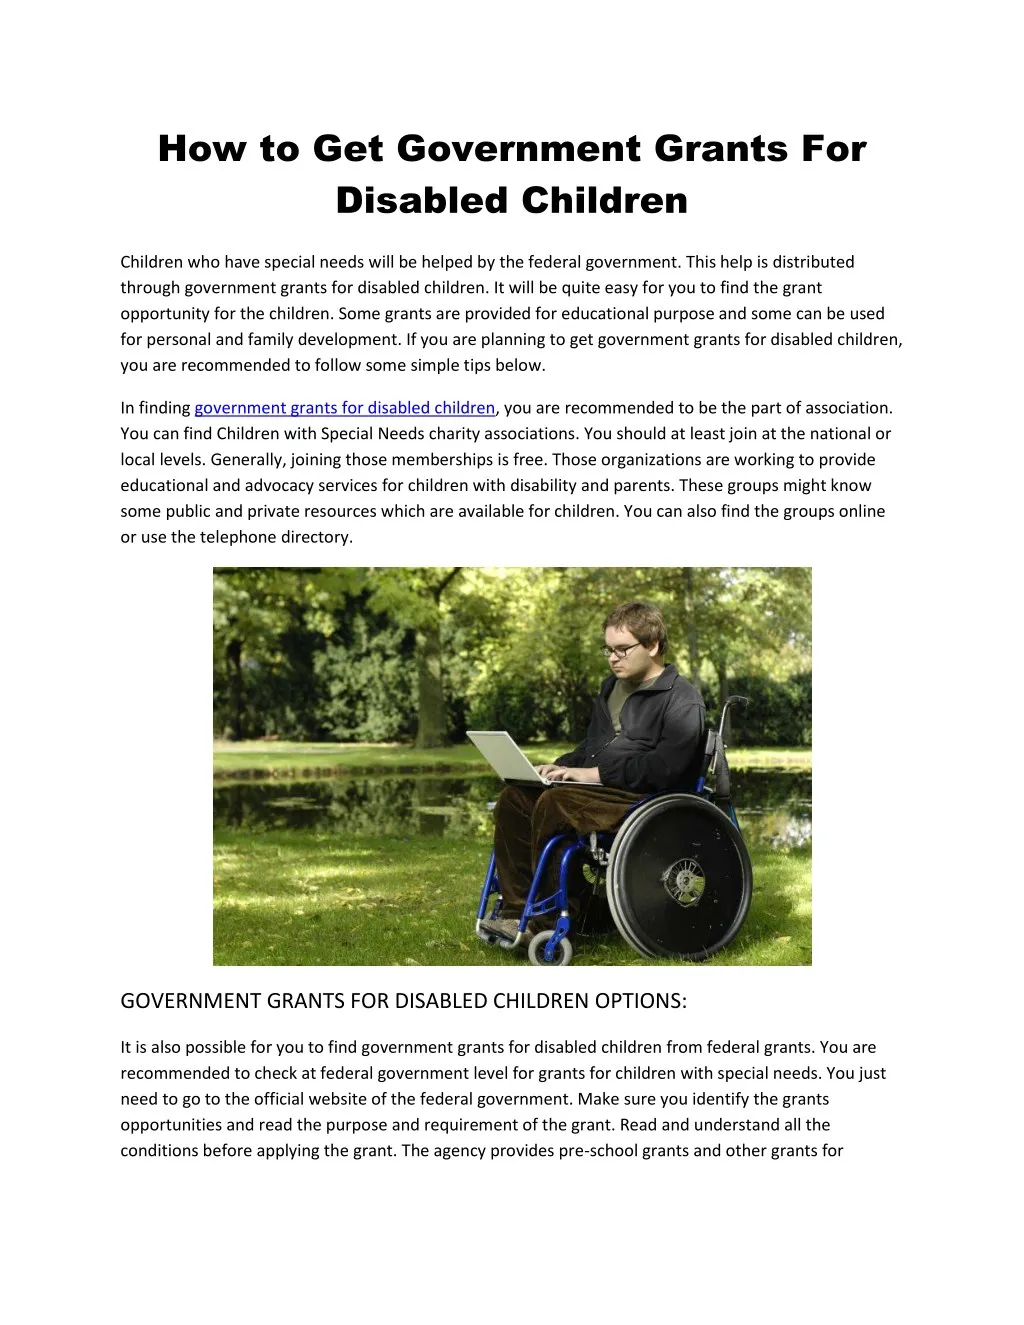 how to get government grants for disabled children